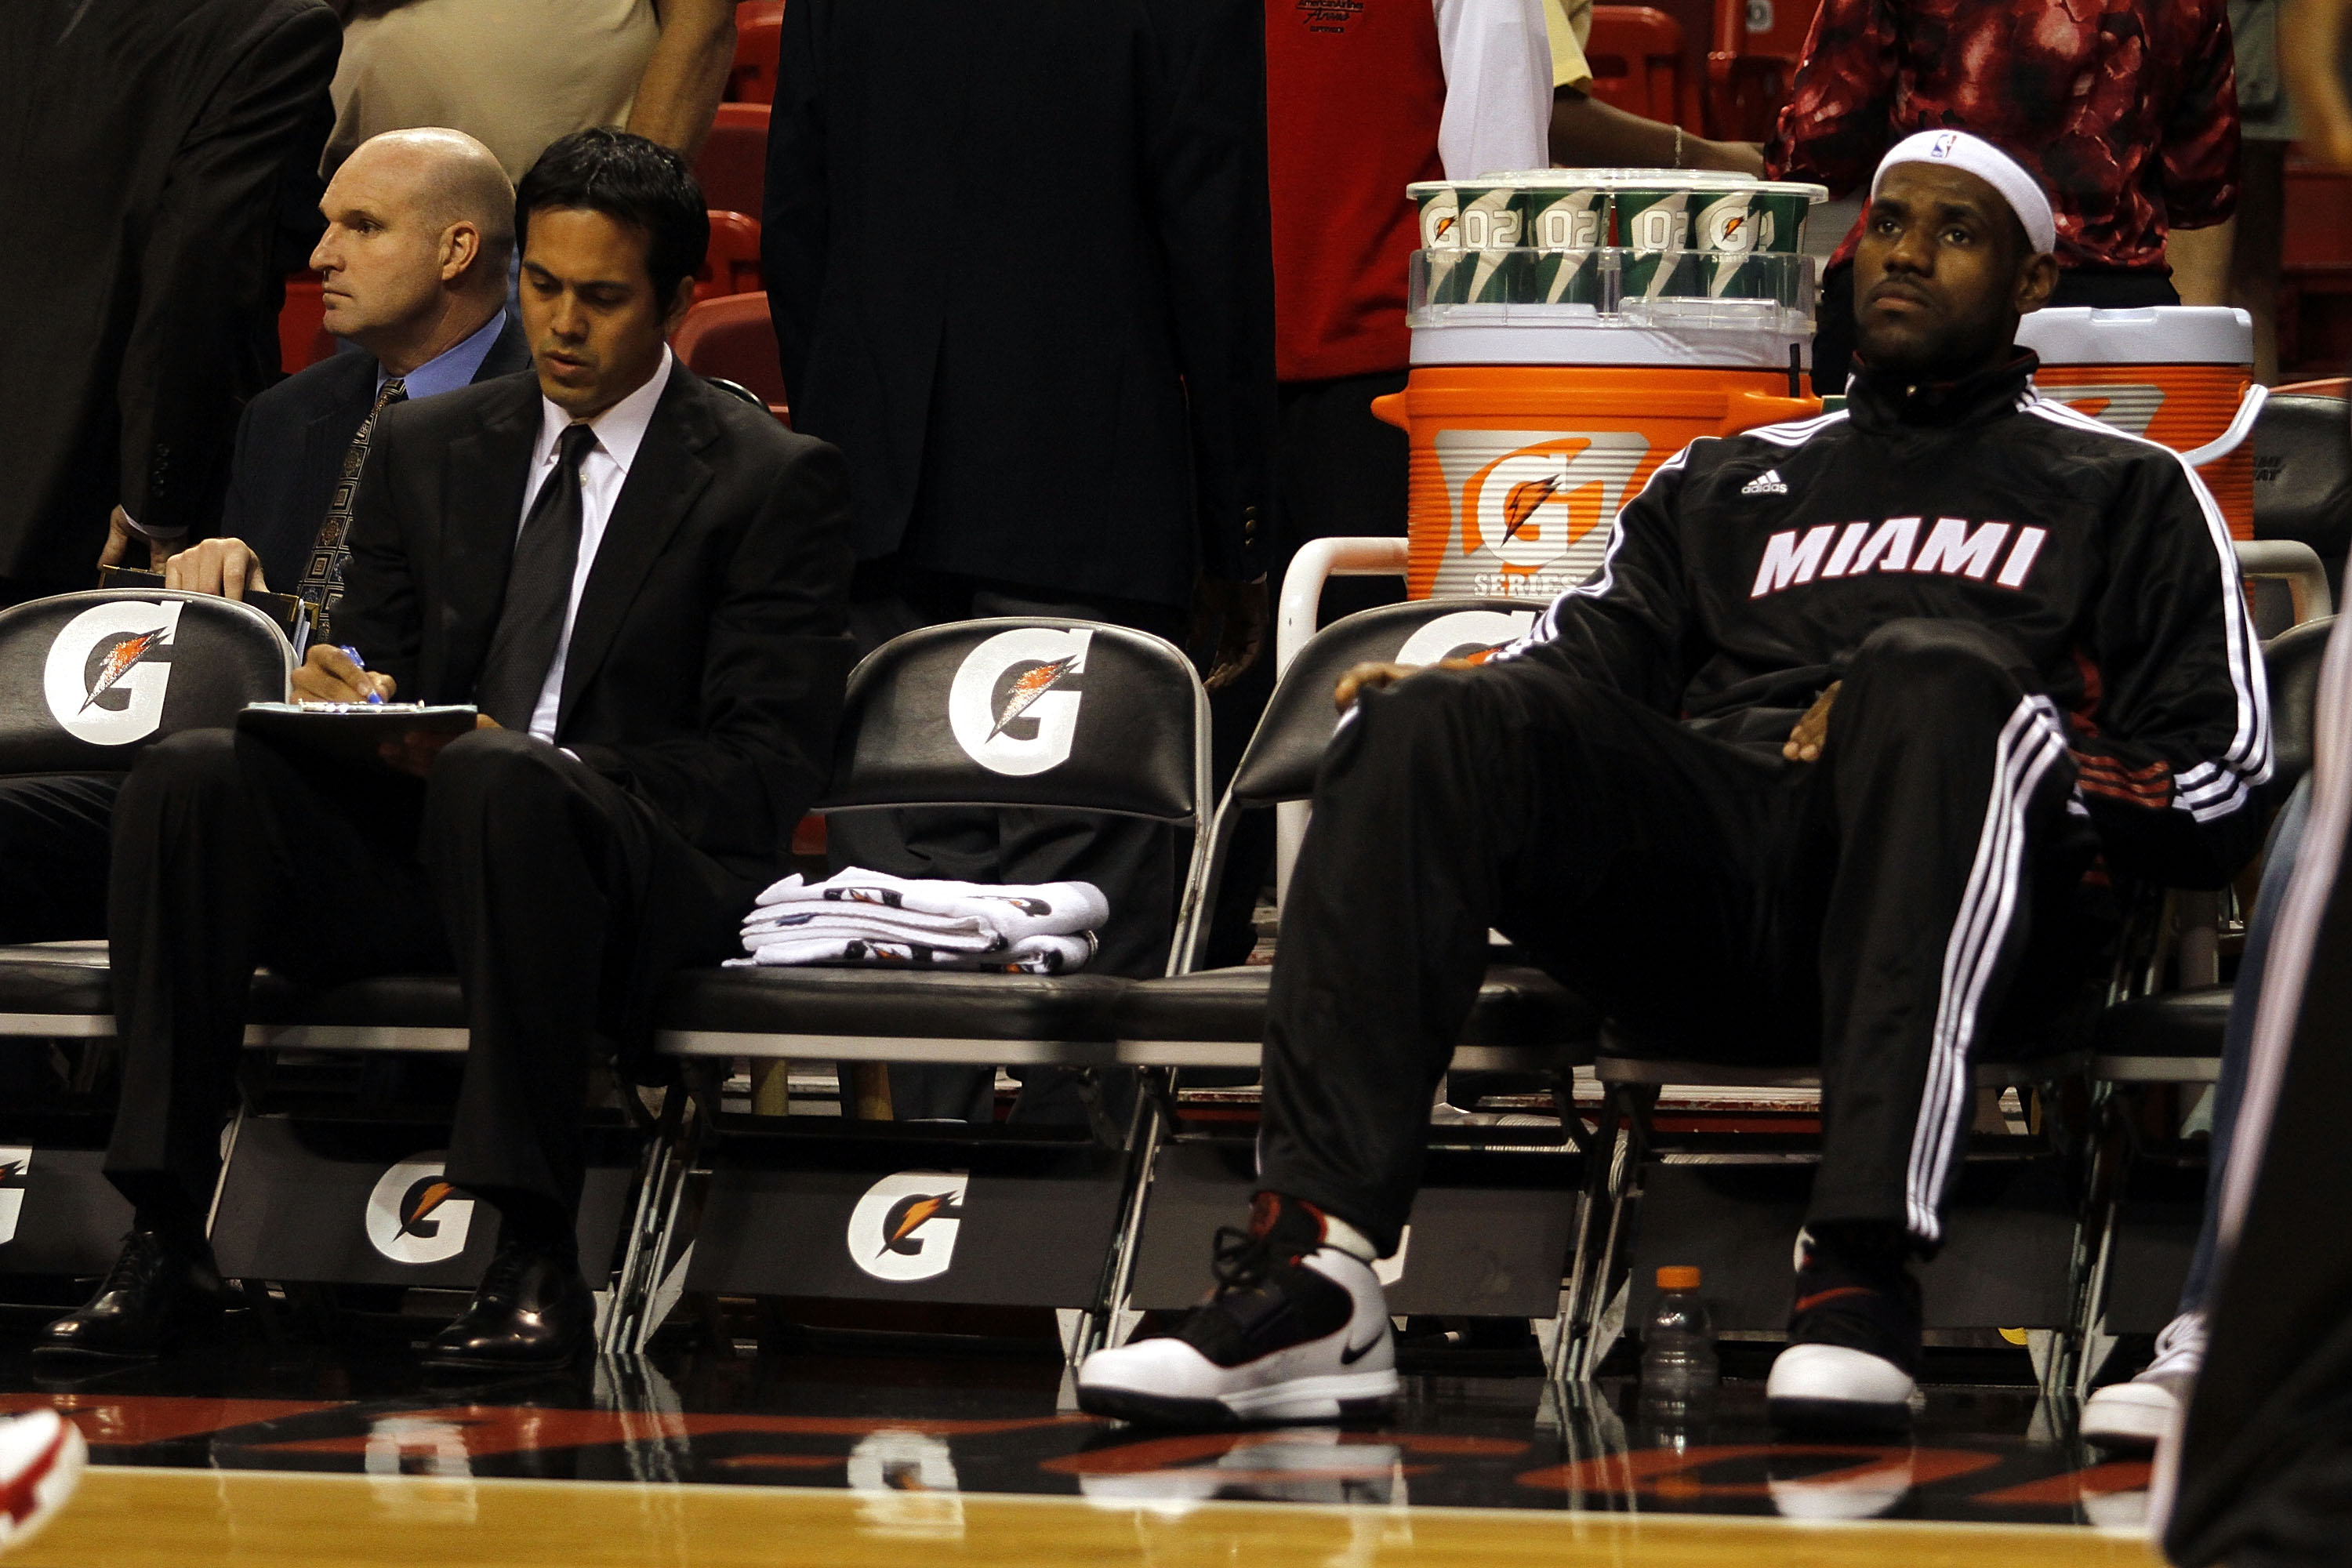 MIAMI - OCTOBER 12:  Forward LeBron James #6 and head coach Erik Spoelstra of the Miami Heat on the bench during a game against CSKA Moskow on October 12, 2010 in Miami, Florida.  NOTE TO USER: User expressly acknowledges and agrees that, by downloading a